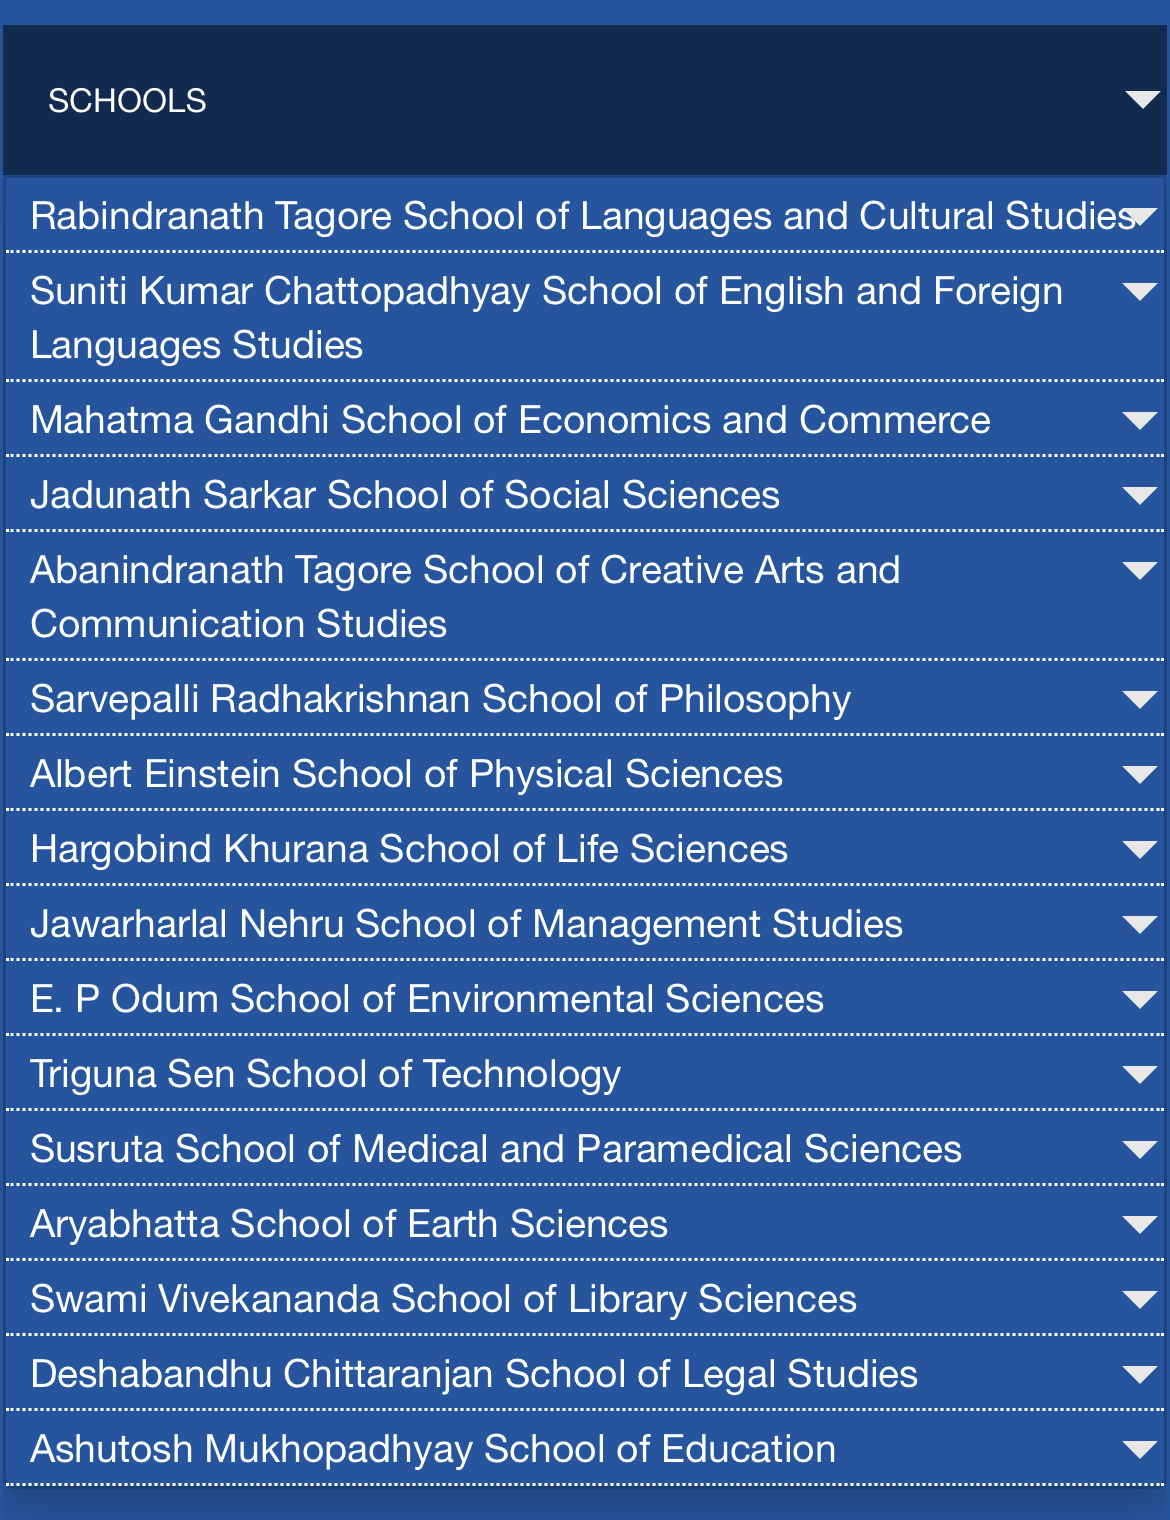 Universities Of North-East India